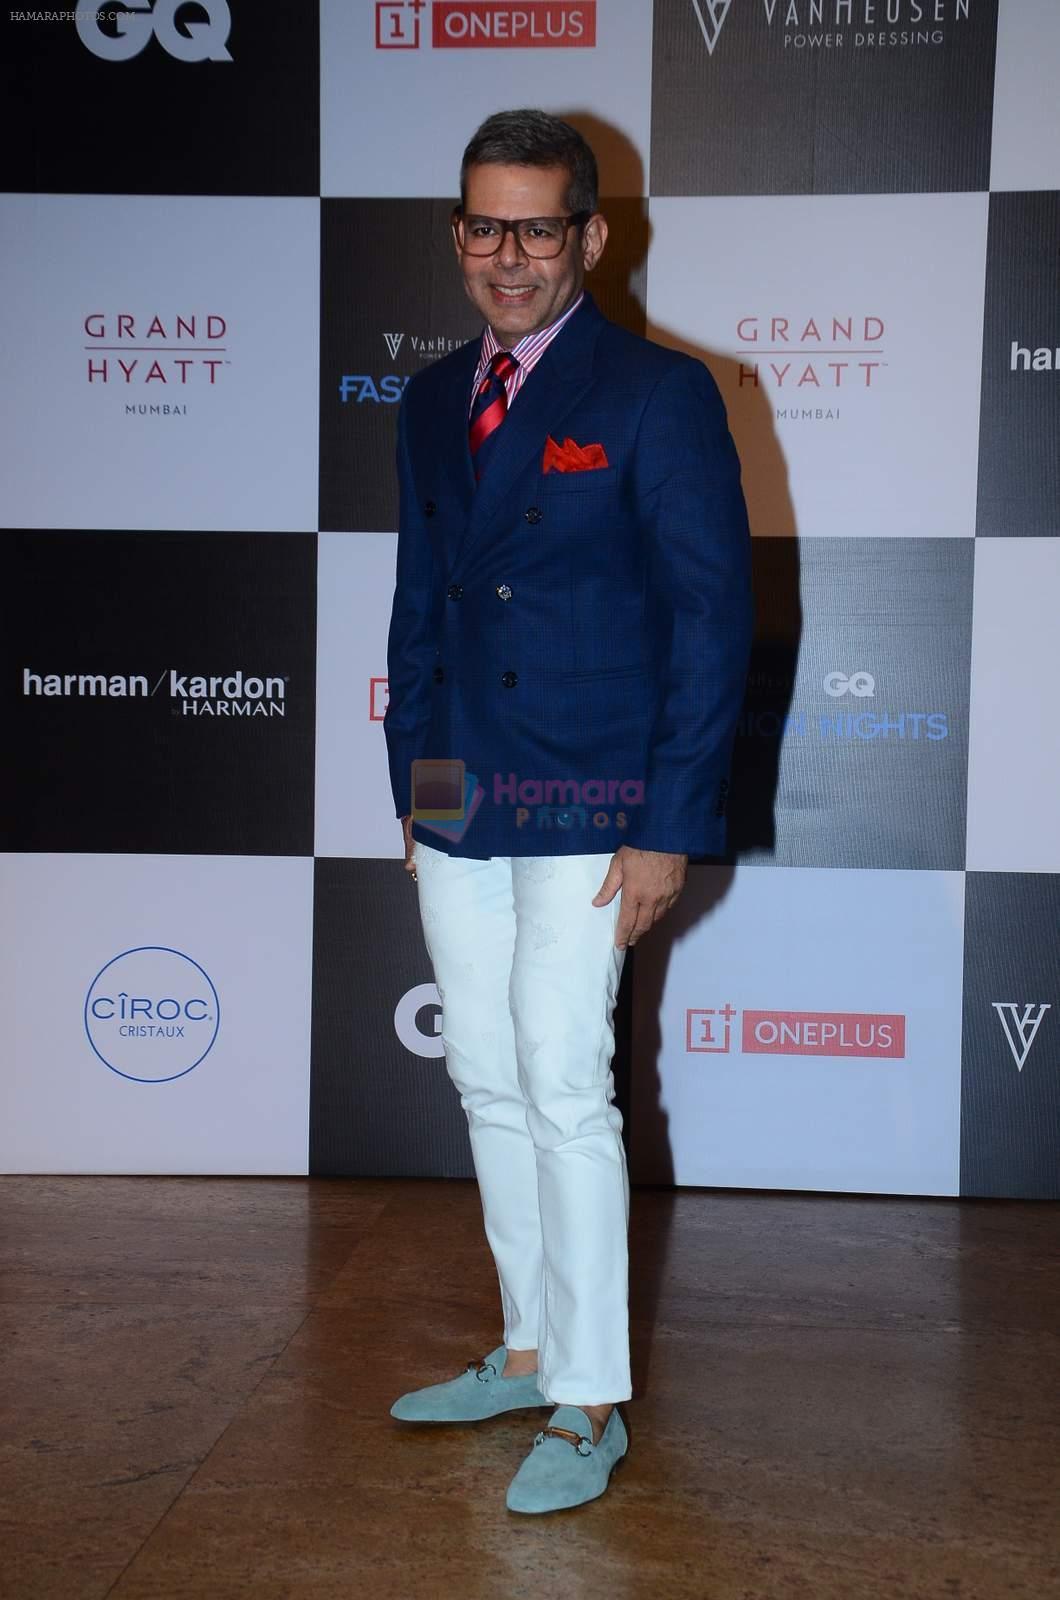 on day 2 of GQ Fashion Nights on 3rd Dec 2015